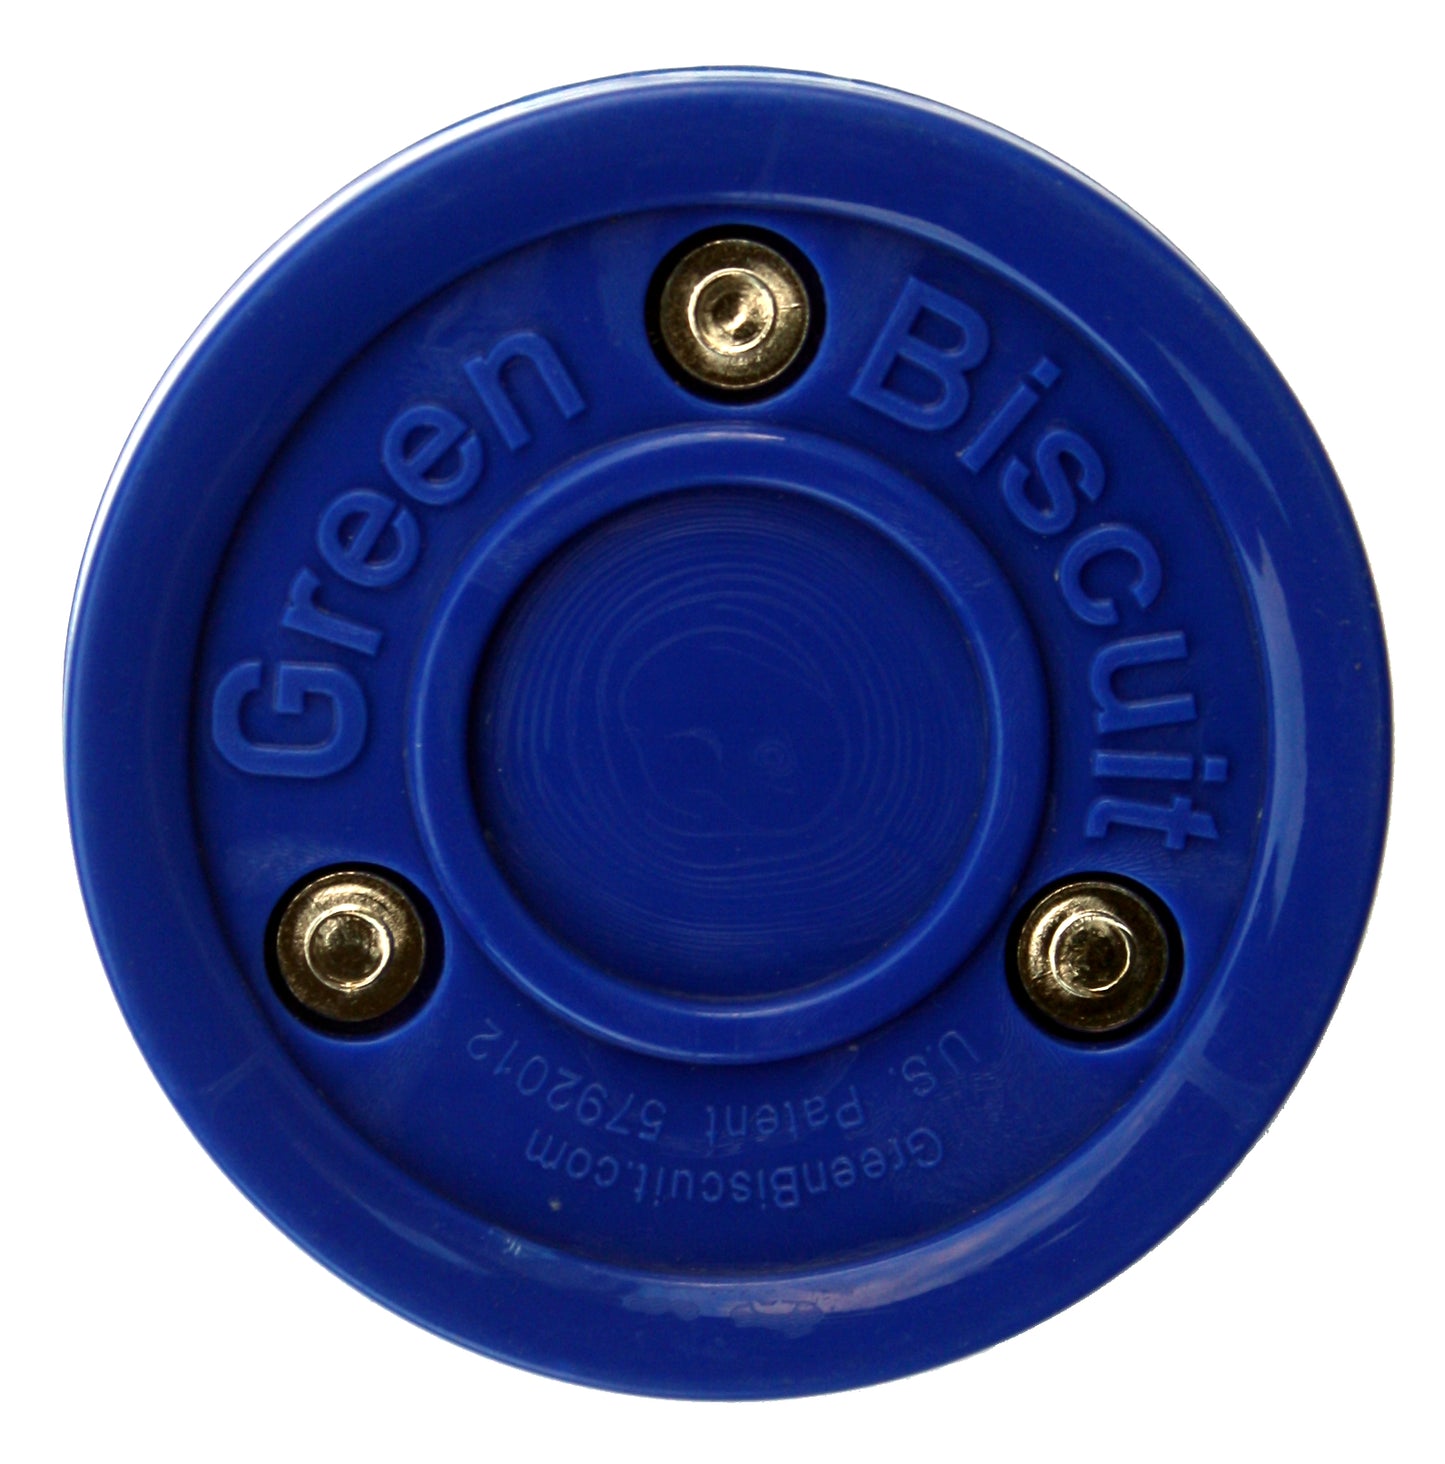 Green Biscuit training puck original color blue for ice hockey